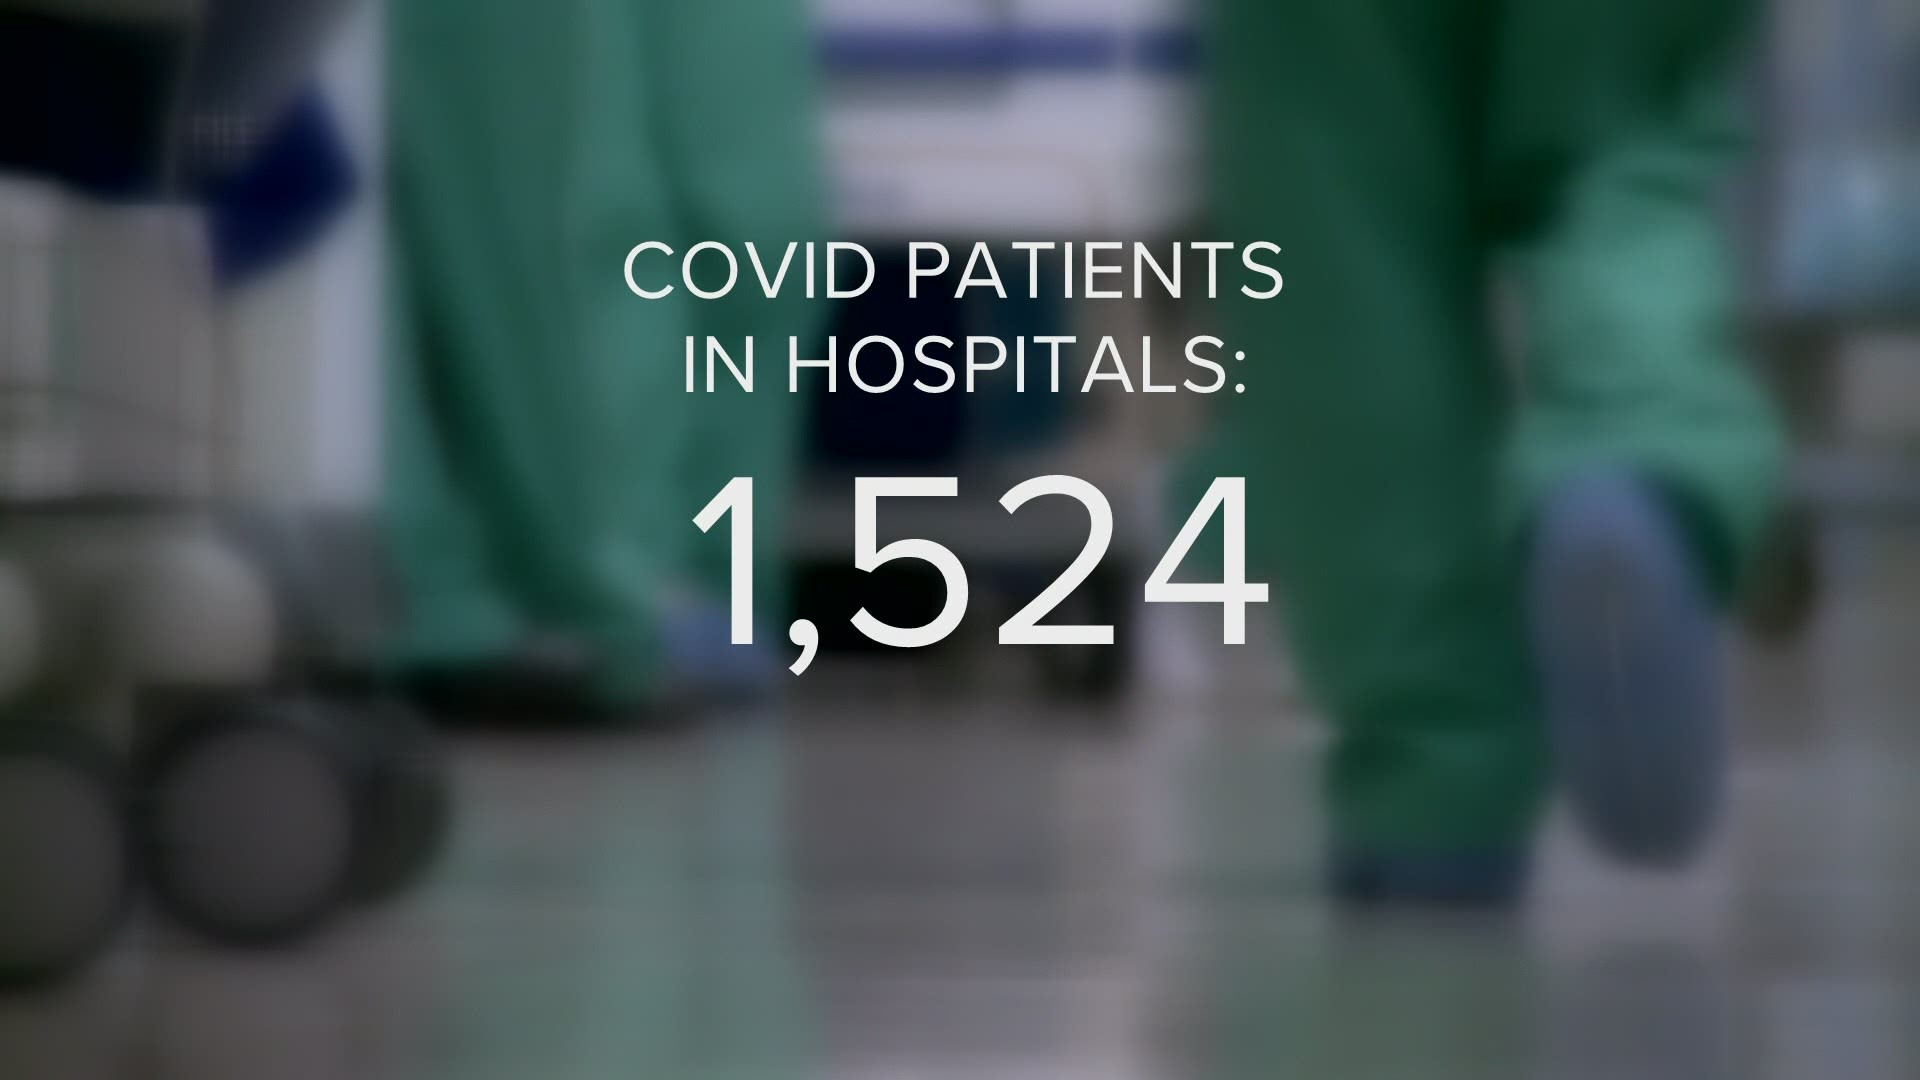 The LDH reports that there were only four ICU beds available on Tuesday in Louisiana's Acadiana region which includes seven parishes near Lafayette.